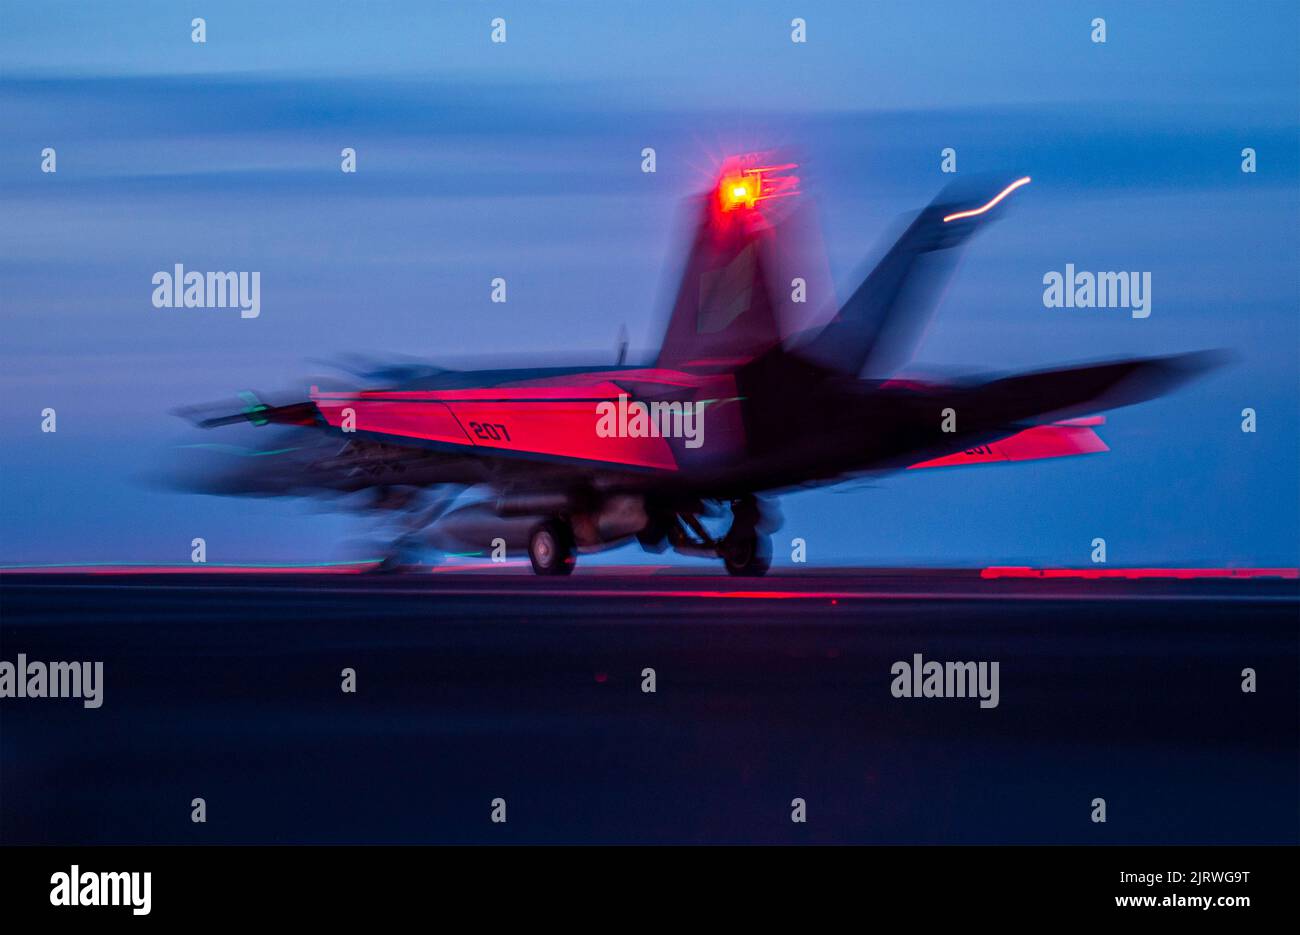 Palma, Spain. 24th Aug, 2022. A U.S. Navy F/A-18E Super Hornet fighter aircraft, attached to the Fighting Checkmates of Strike Fighter Squadron 211 launches during twilight operations from the flight deck of the Nimitz-class aircraft carrier USS Harry S. Truman during NATO operations, August 24, 2022 off the coast of Mallorca, Spain. Credit: MC3 Hunter Day/U.S. Navy/Alamy Live News Stock Photo